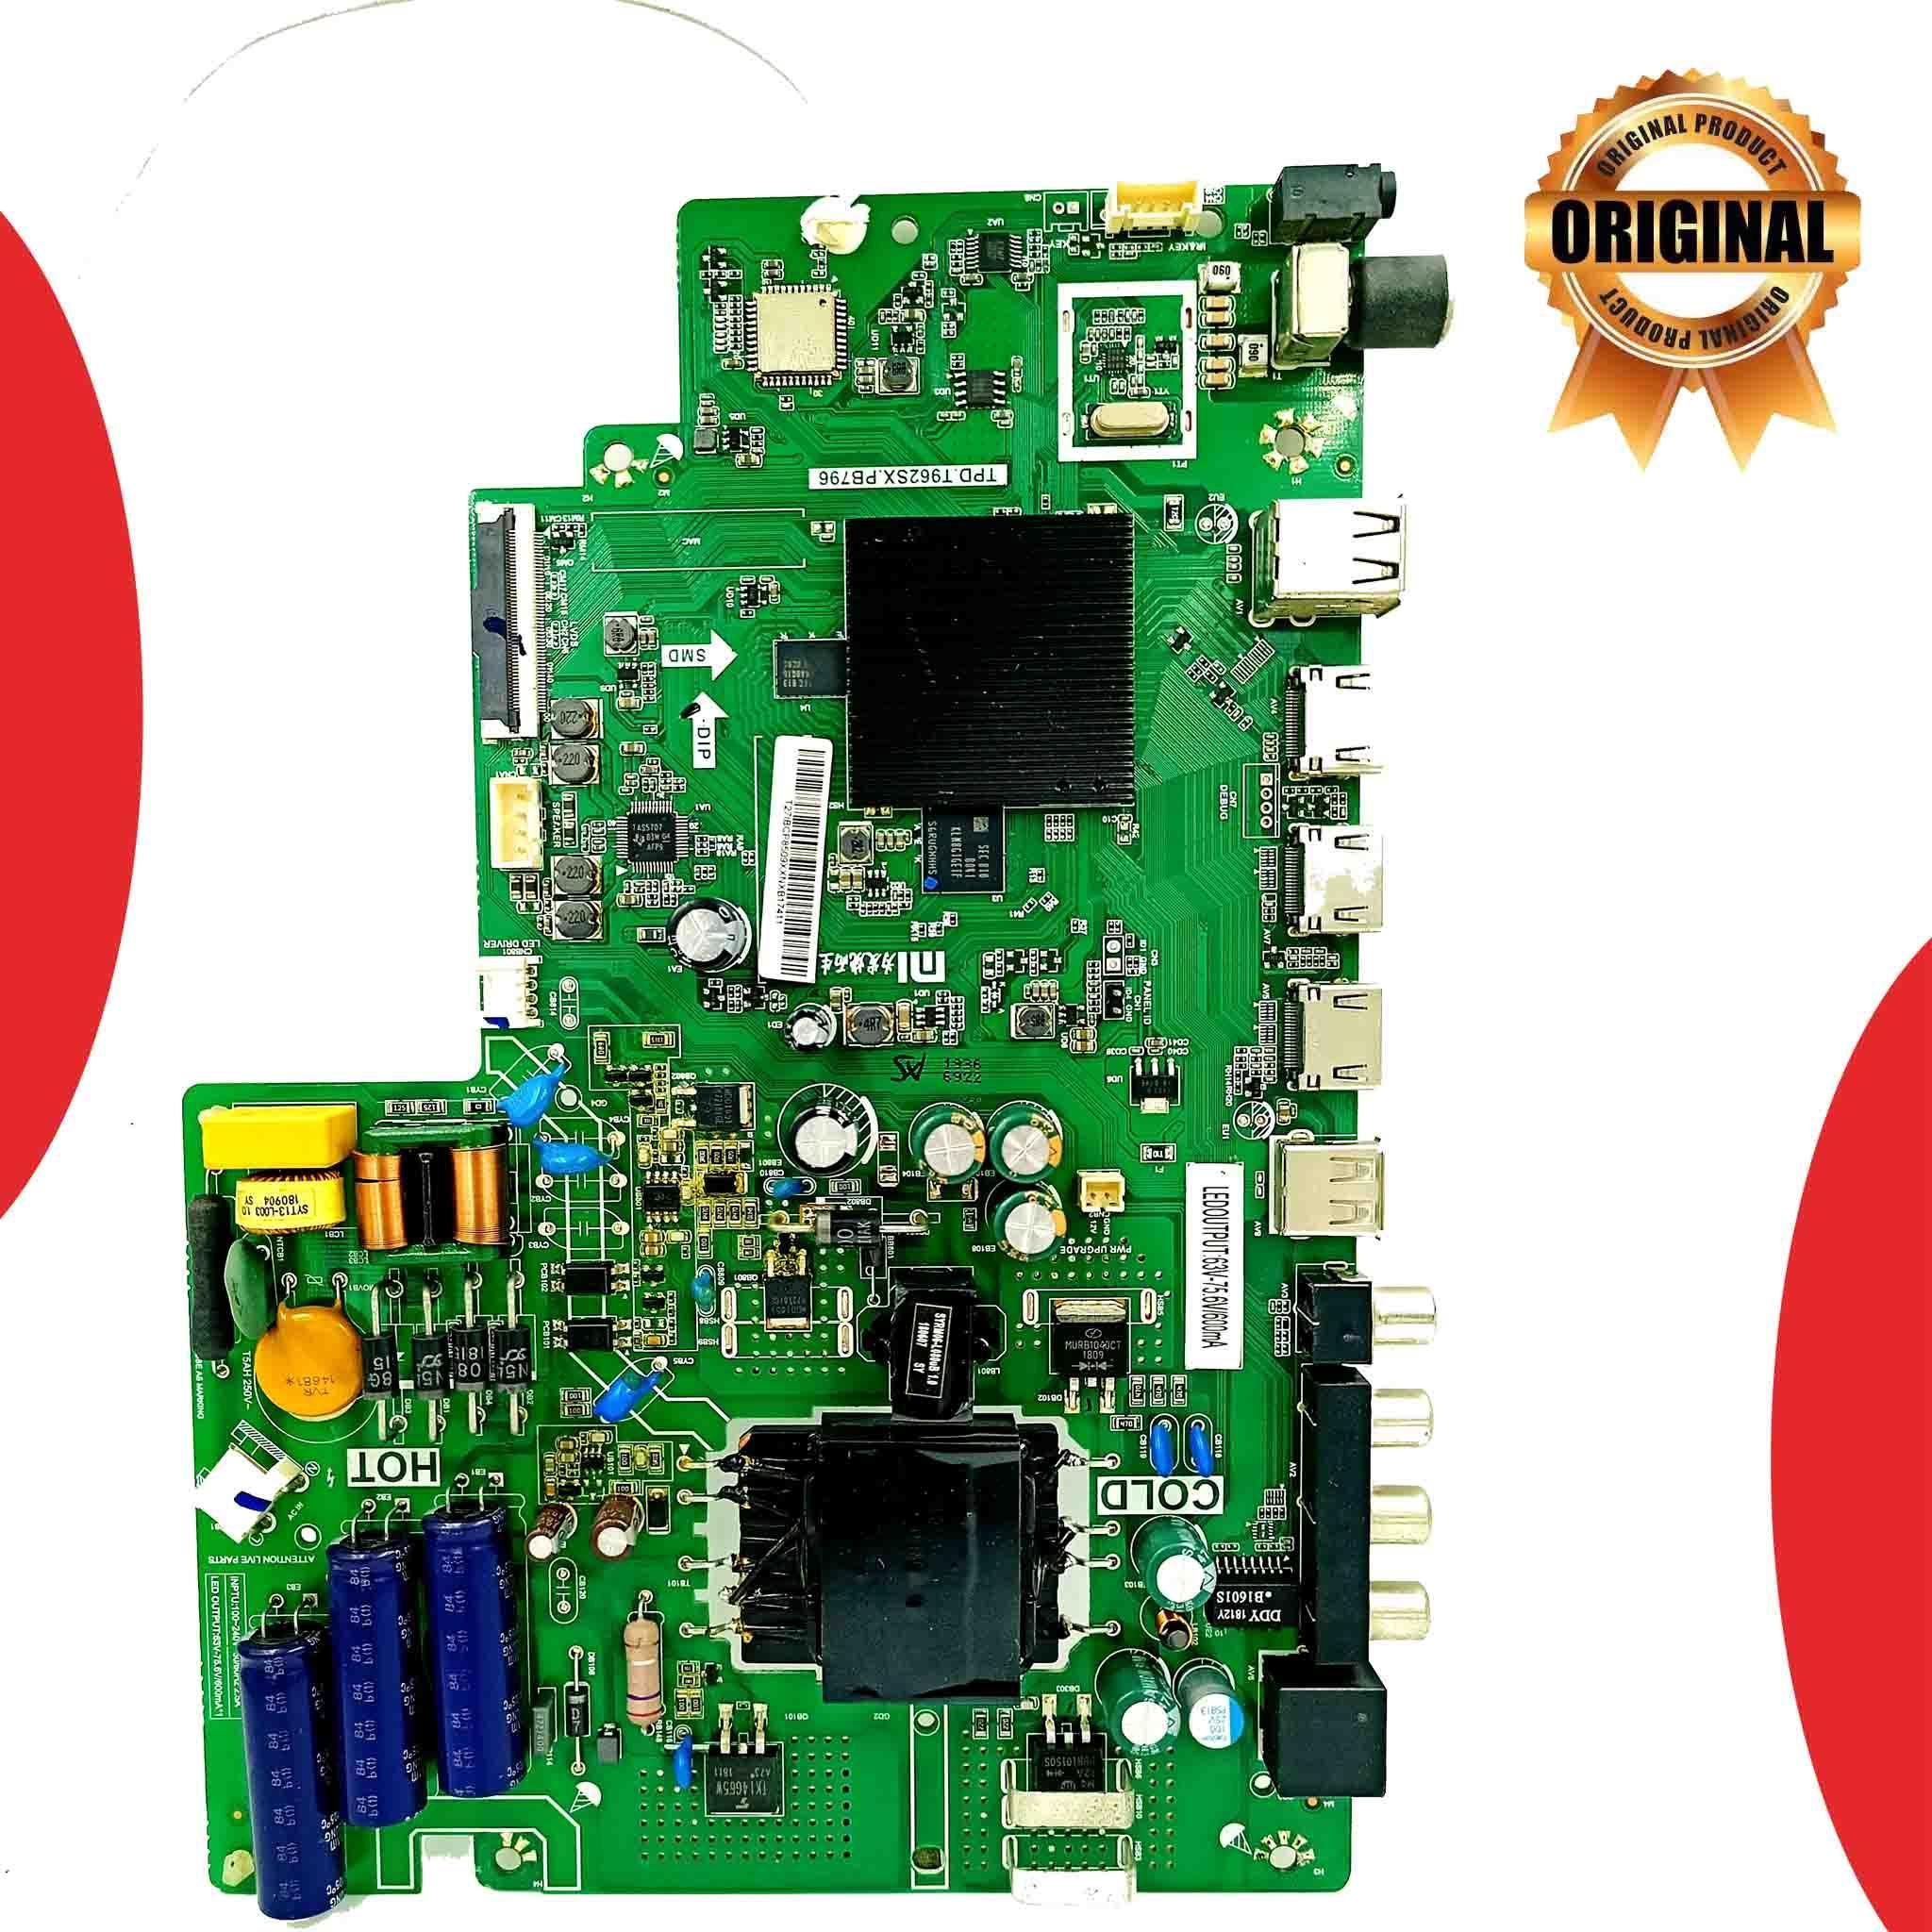 Mi 43 inch LED TV Motherboard for Model L43M5-AI - Great Bharat Electronics